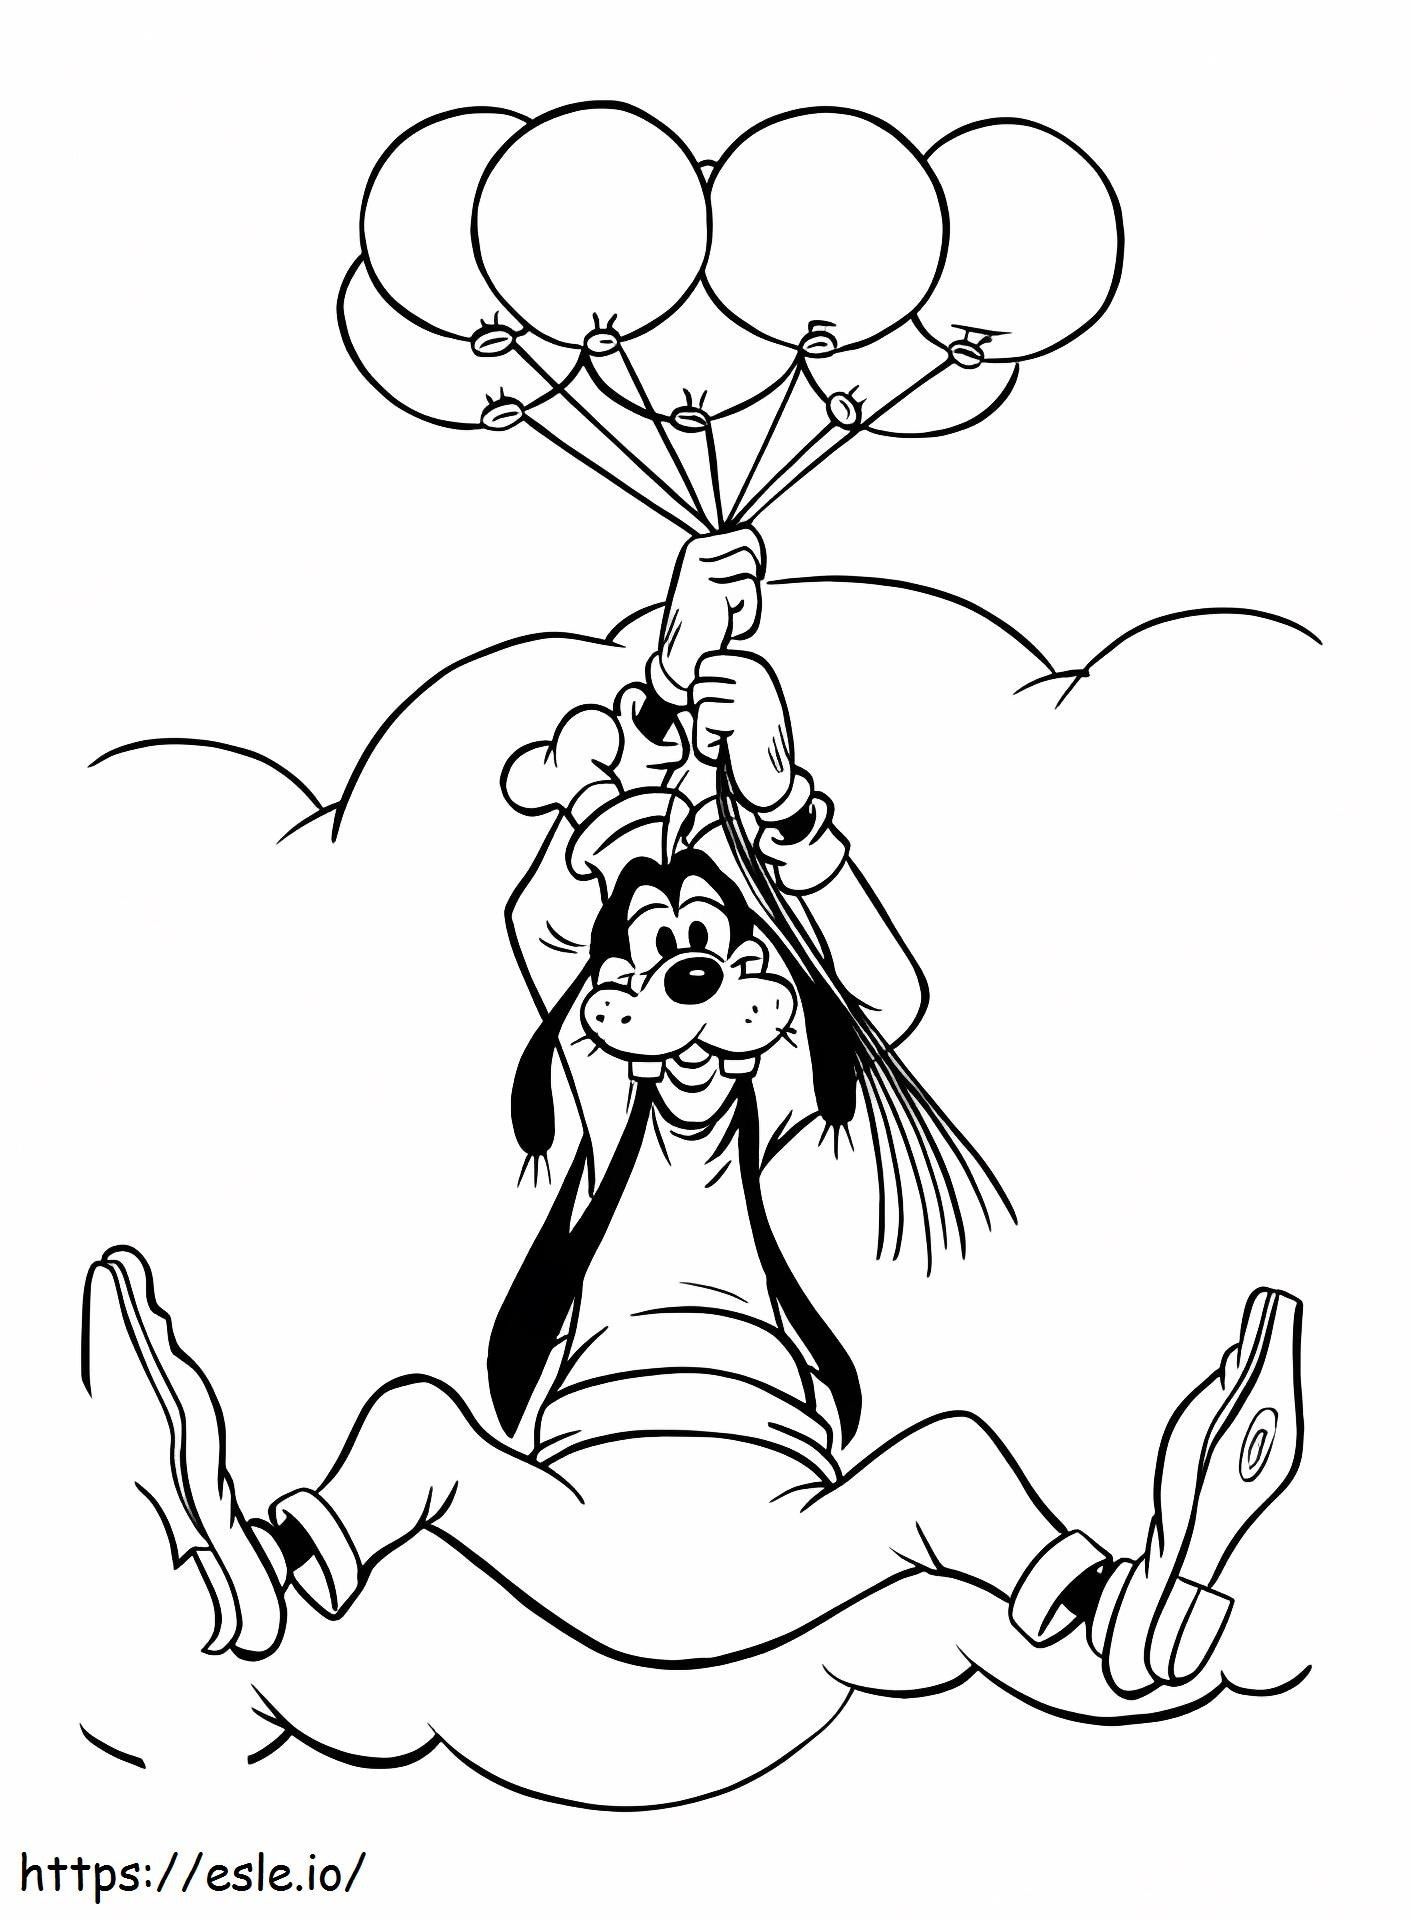 1532918892 Goofy Flying By Balloons A4 coloring page